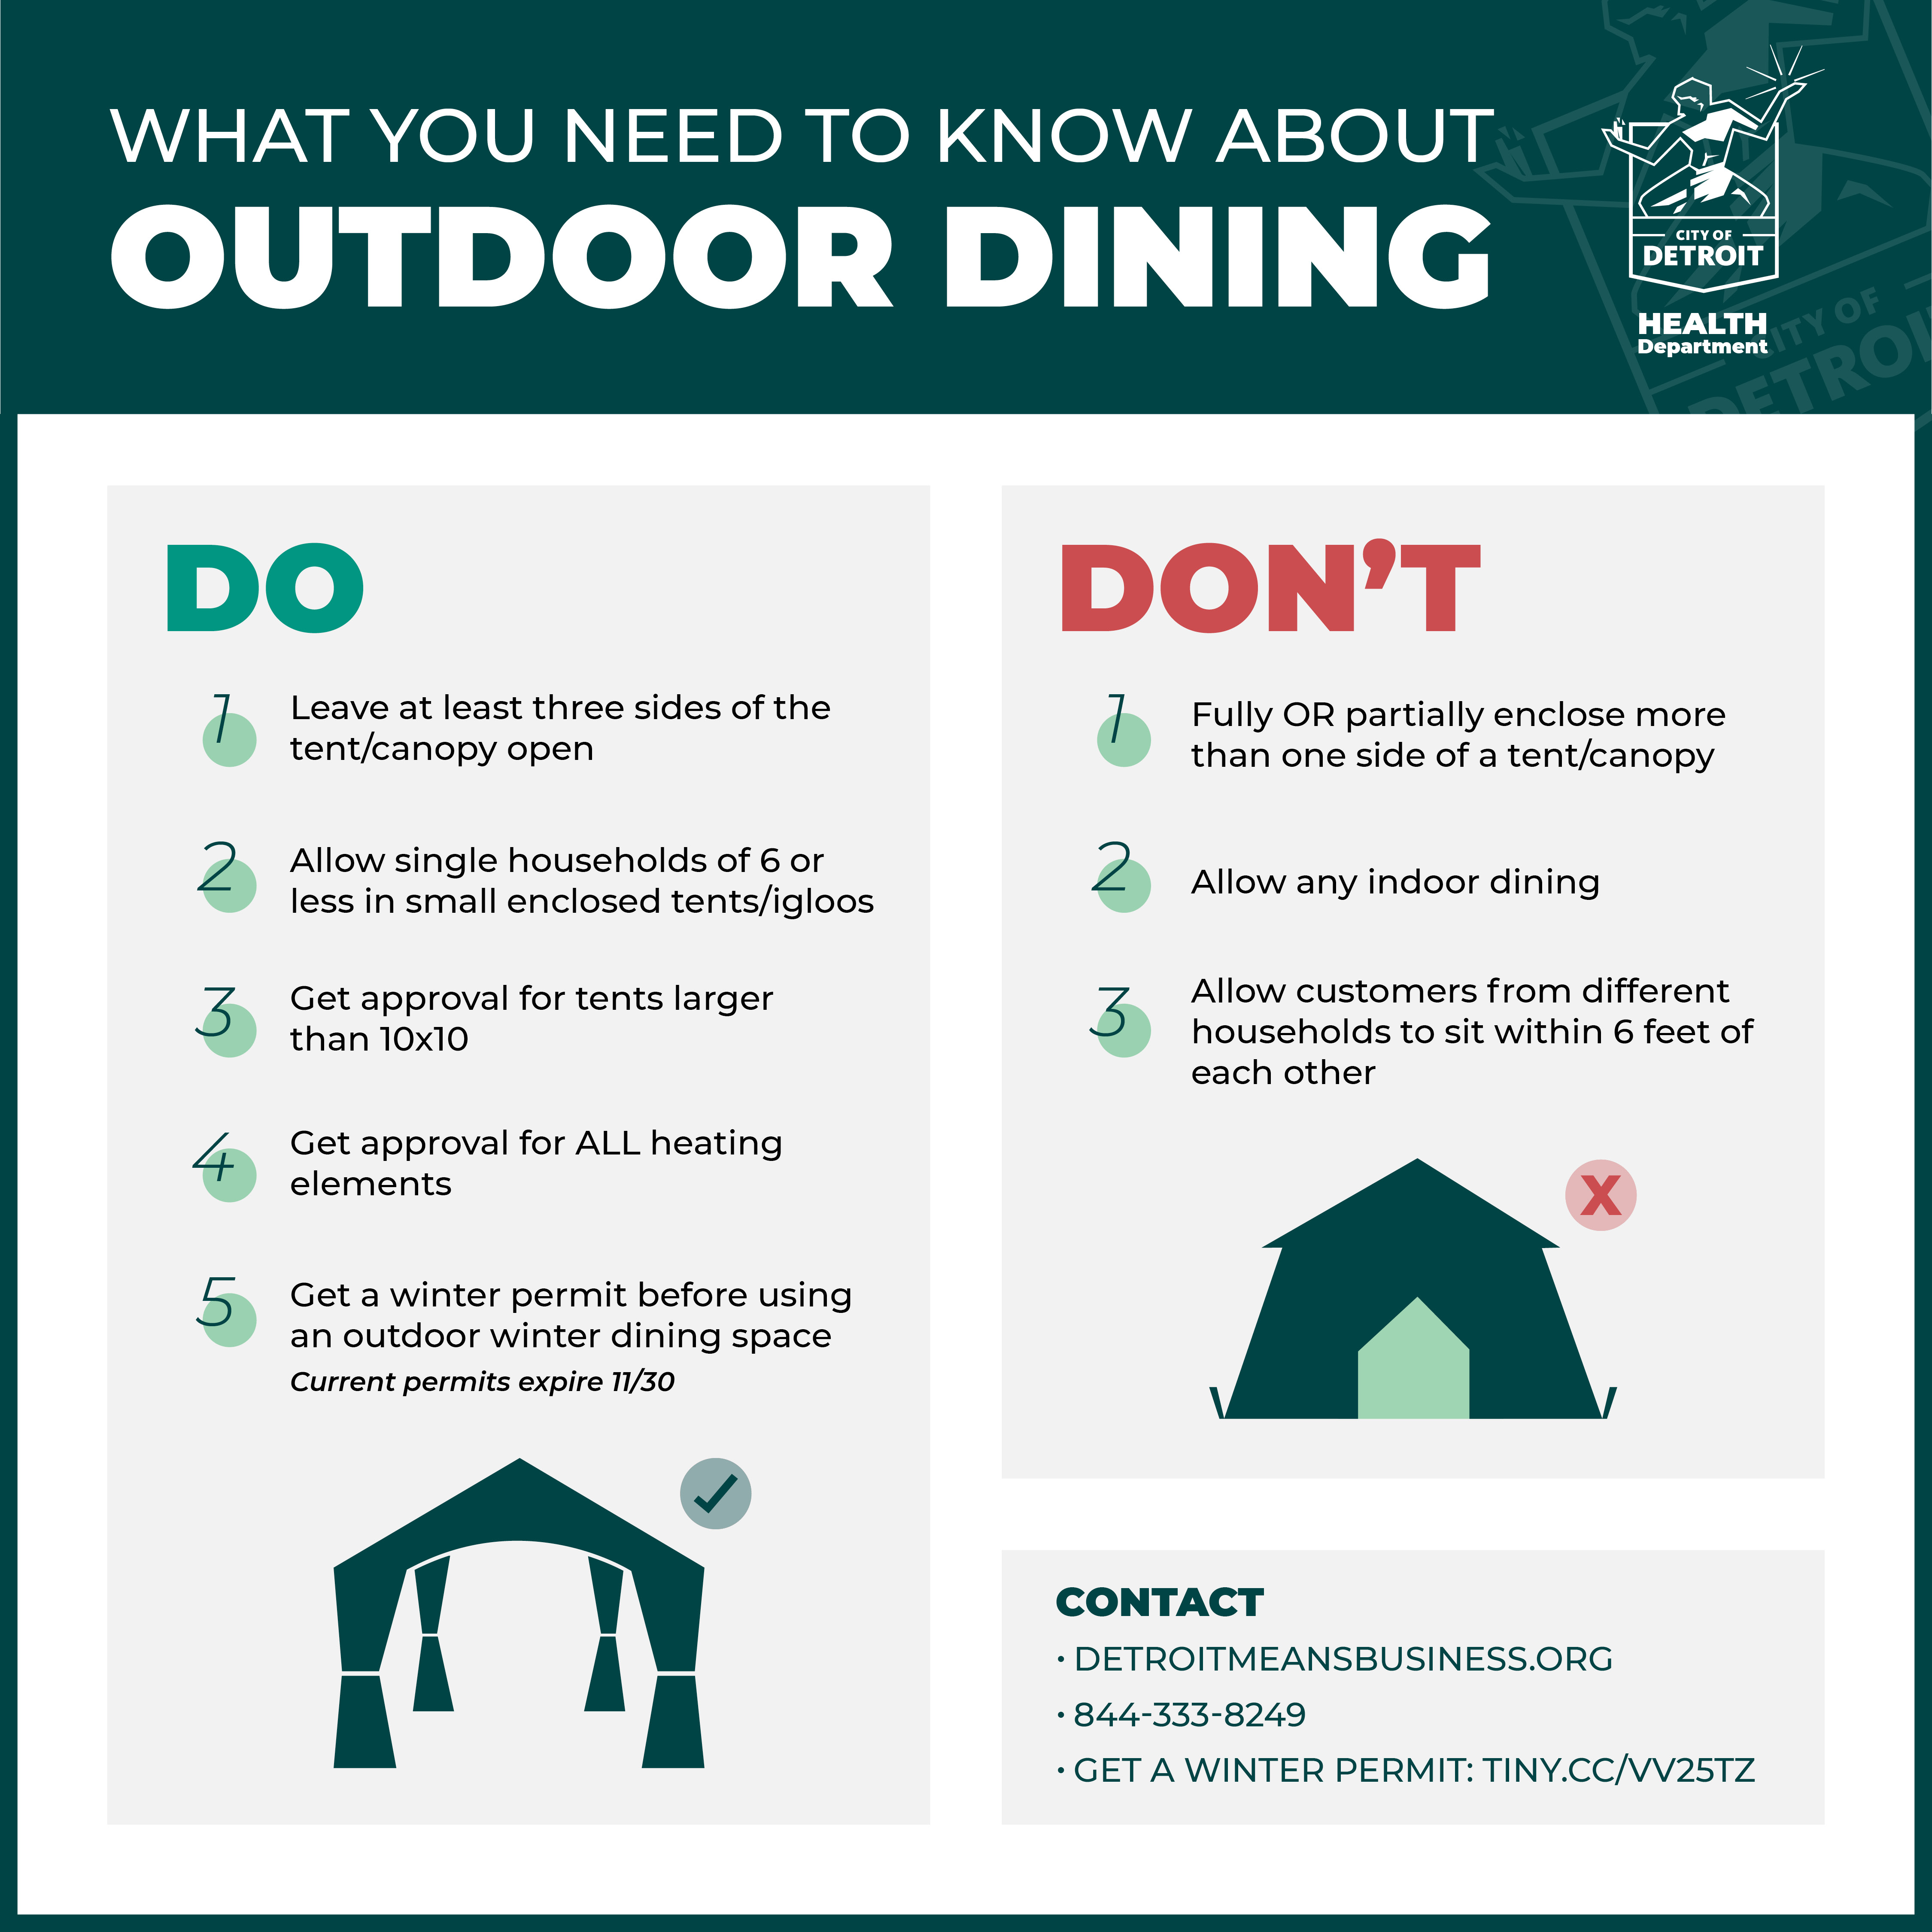 Outdoor Dining – Do and Don't